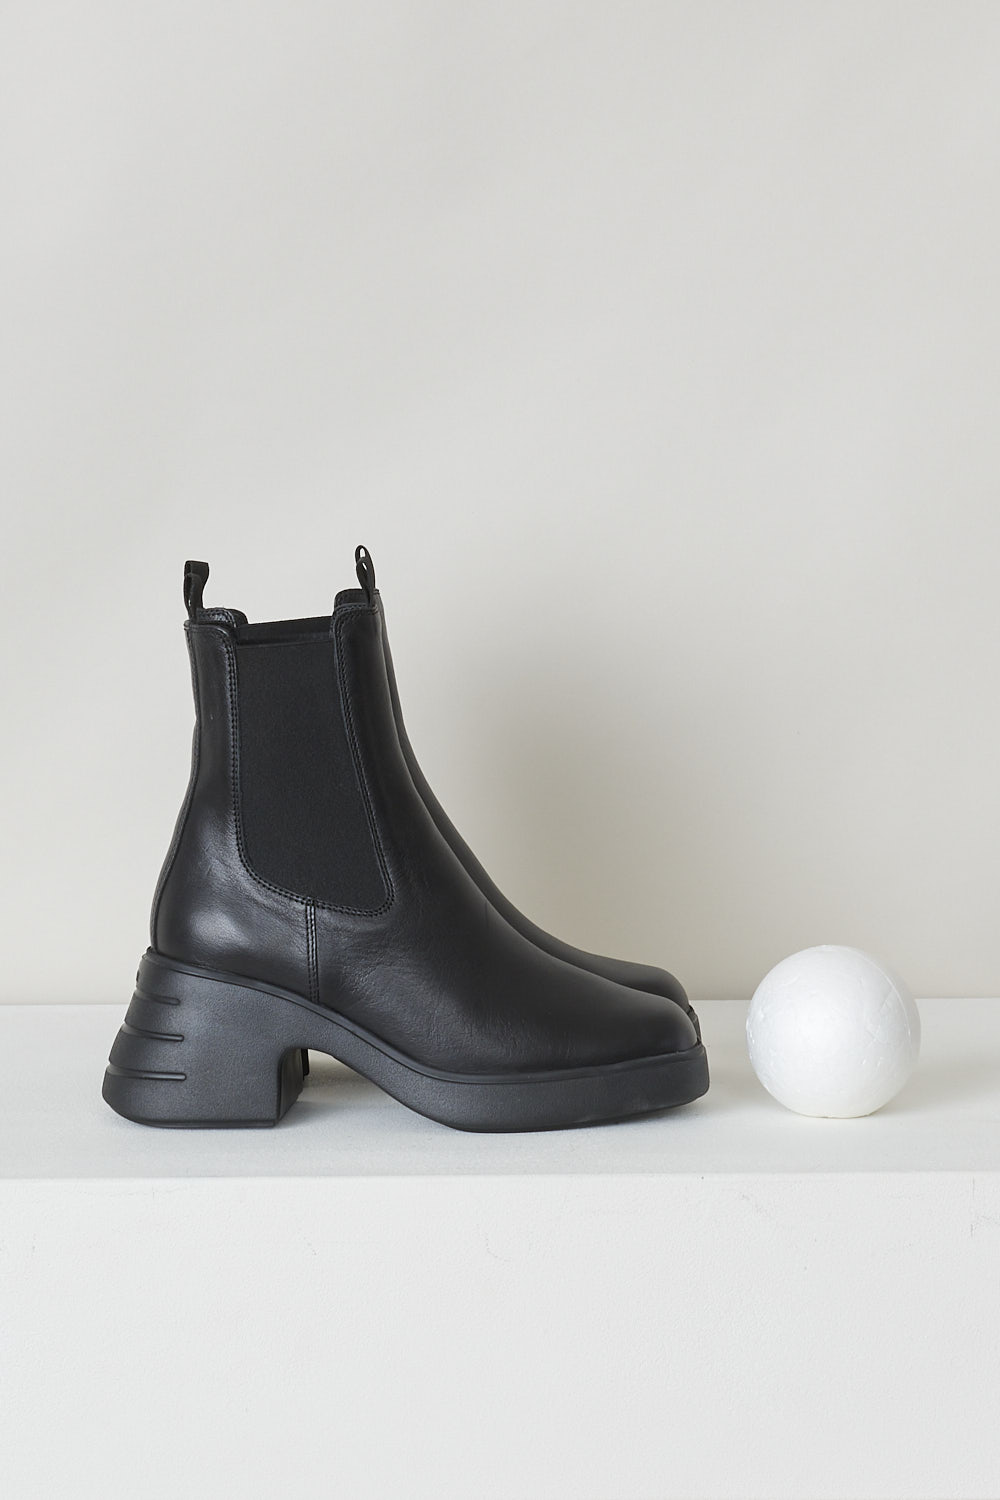 HOGAN, BLACK CHELSEA BOOTS, HXW6180EL20ZKAB999_H618_CHELSEA, Black, Side, These black Chelsea boots feature elasticated gusseted sides, a slightly squared toe and a chunky heel and sole. These boots have pull tabs on the front and back of the top edge. 

